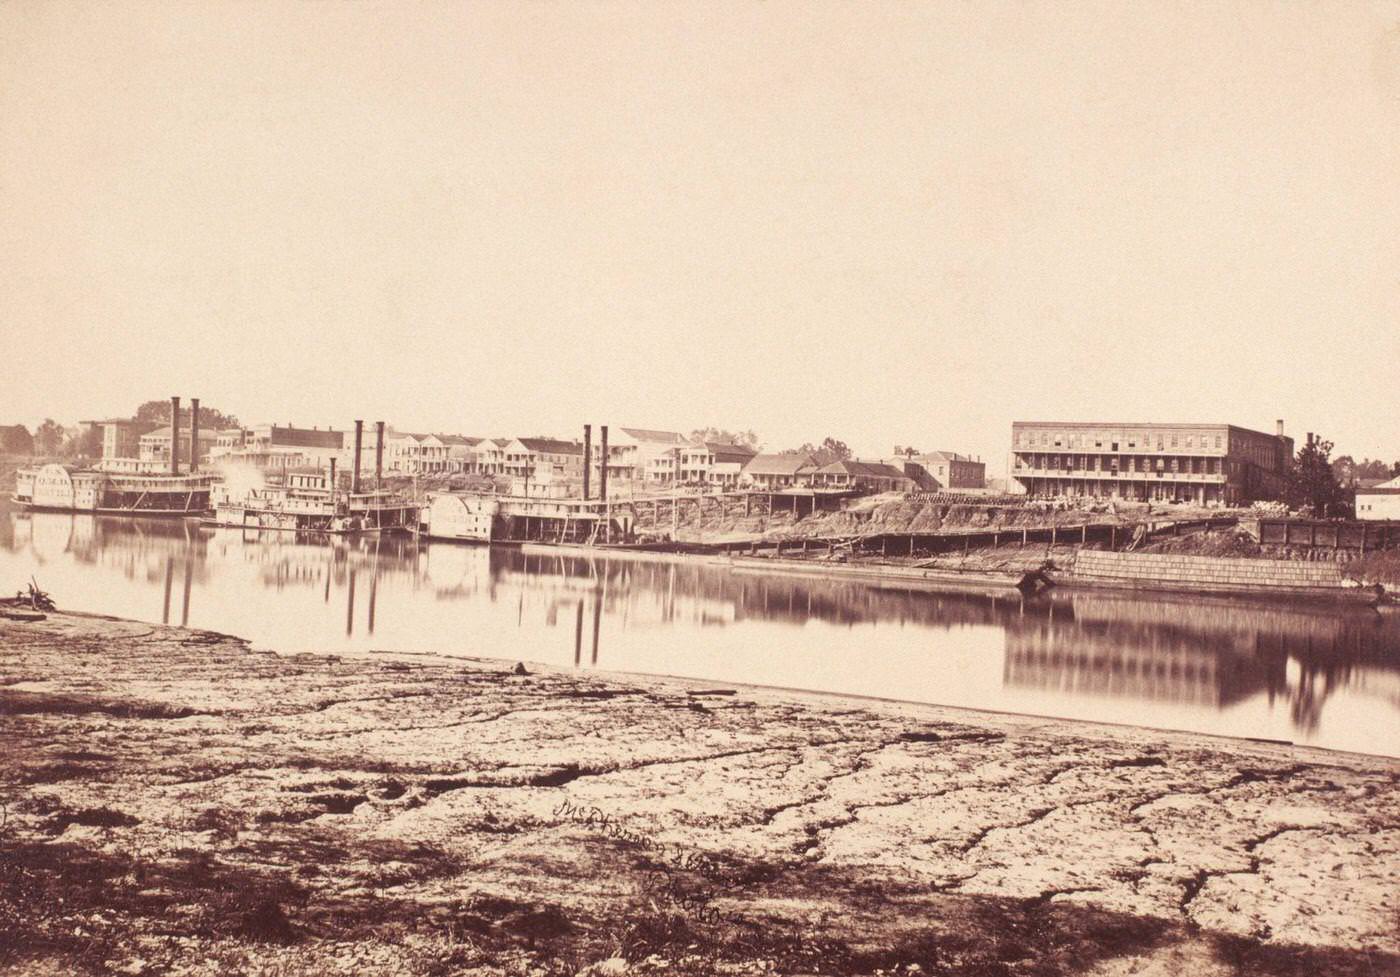 Union forces occupied Alexandria, 1864